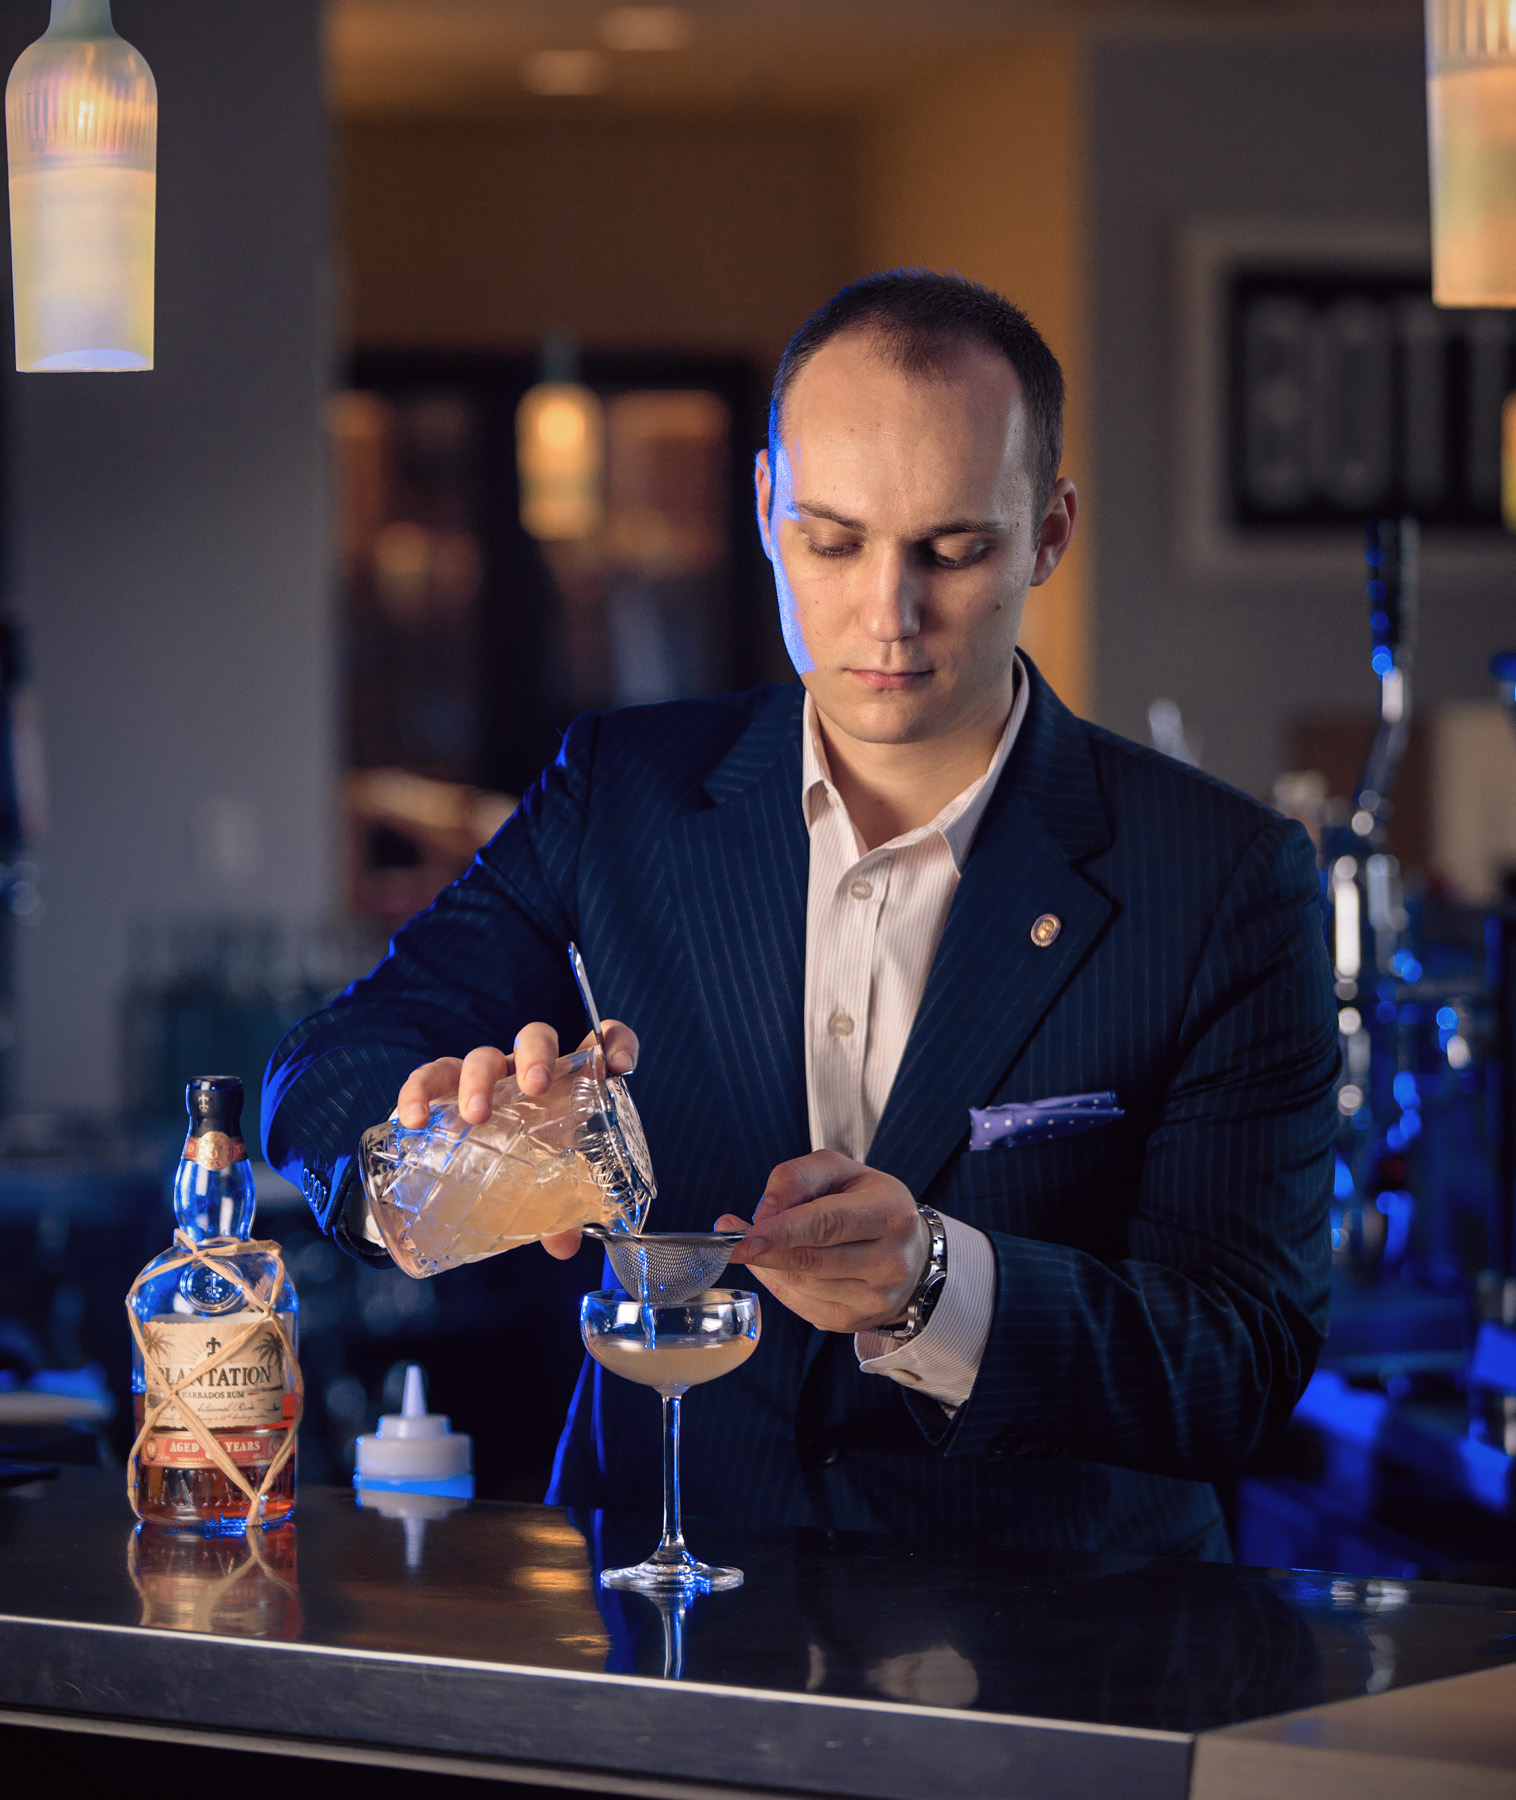 Bottlest General Manager, Sommelier and Chief Mixologist, Vlada Stojanov, spearheads the bar's Somm-driven, custom crafted cocktail program.